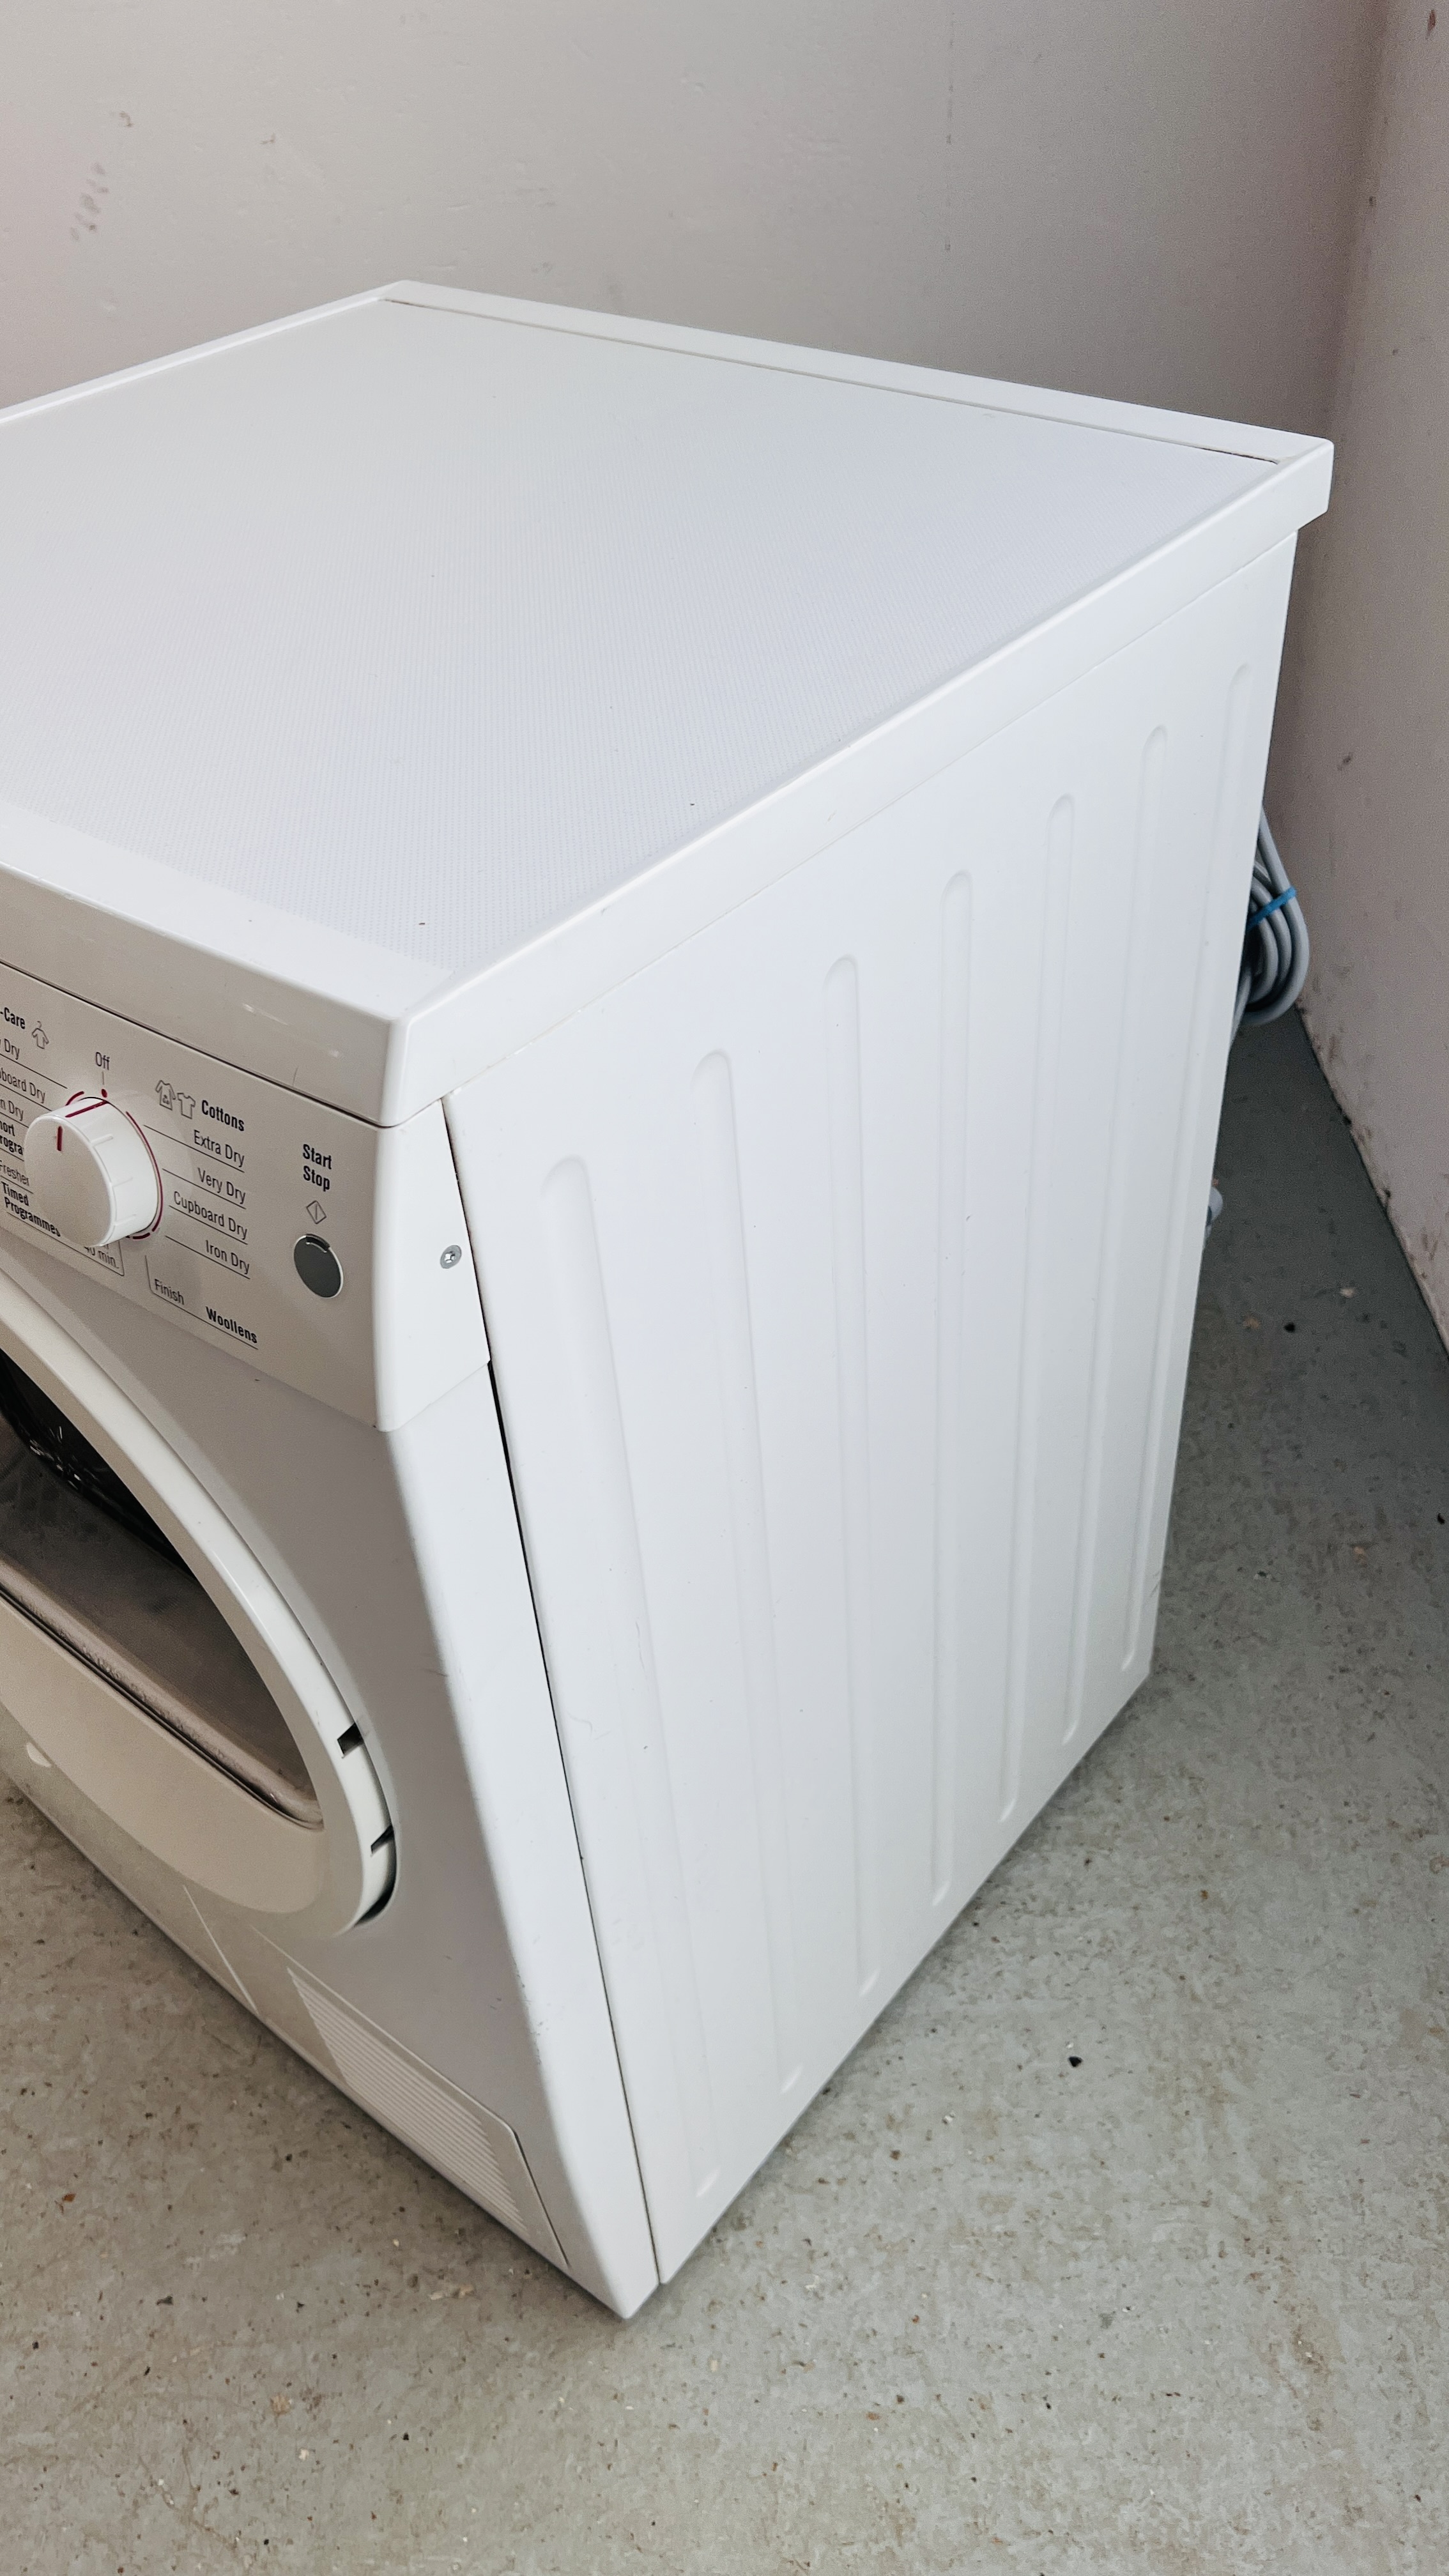 BOSCH EXXCEL CONDENSER TUMBLE DRYER - SOLD AS SEEN - Image 7 of 8